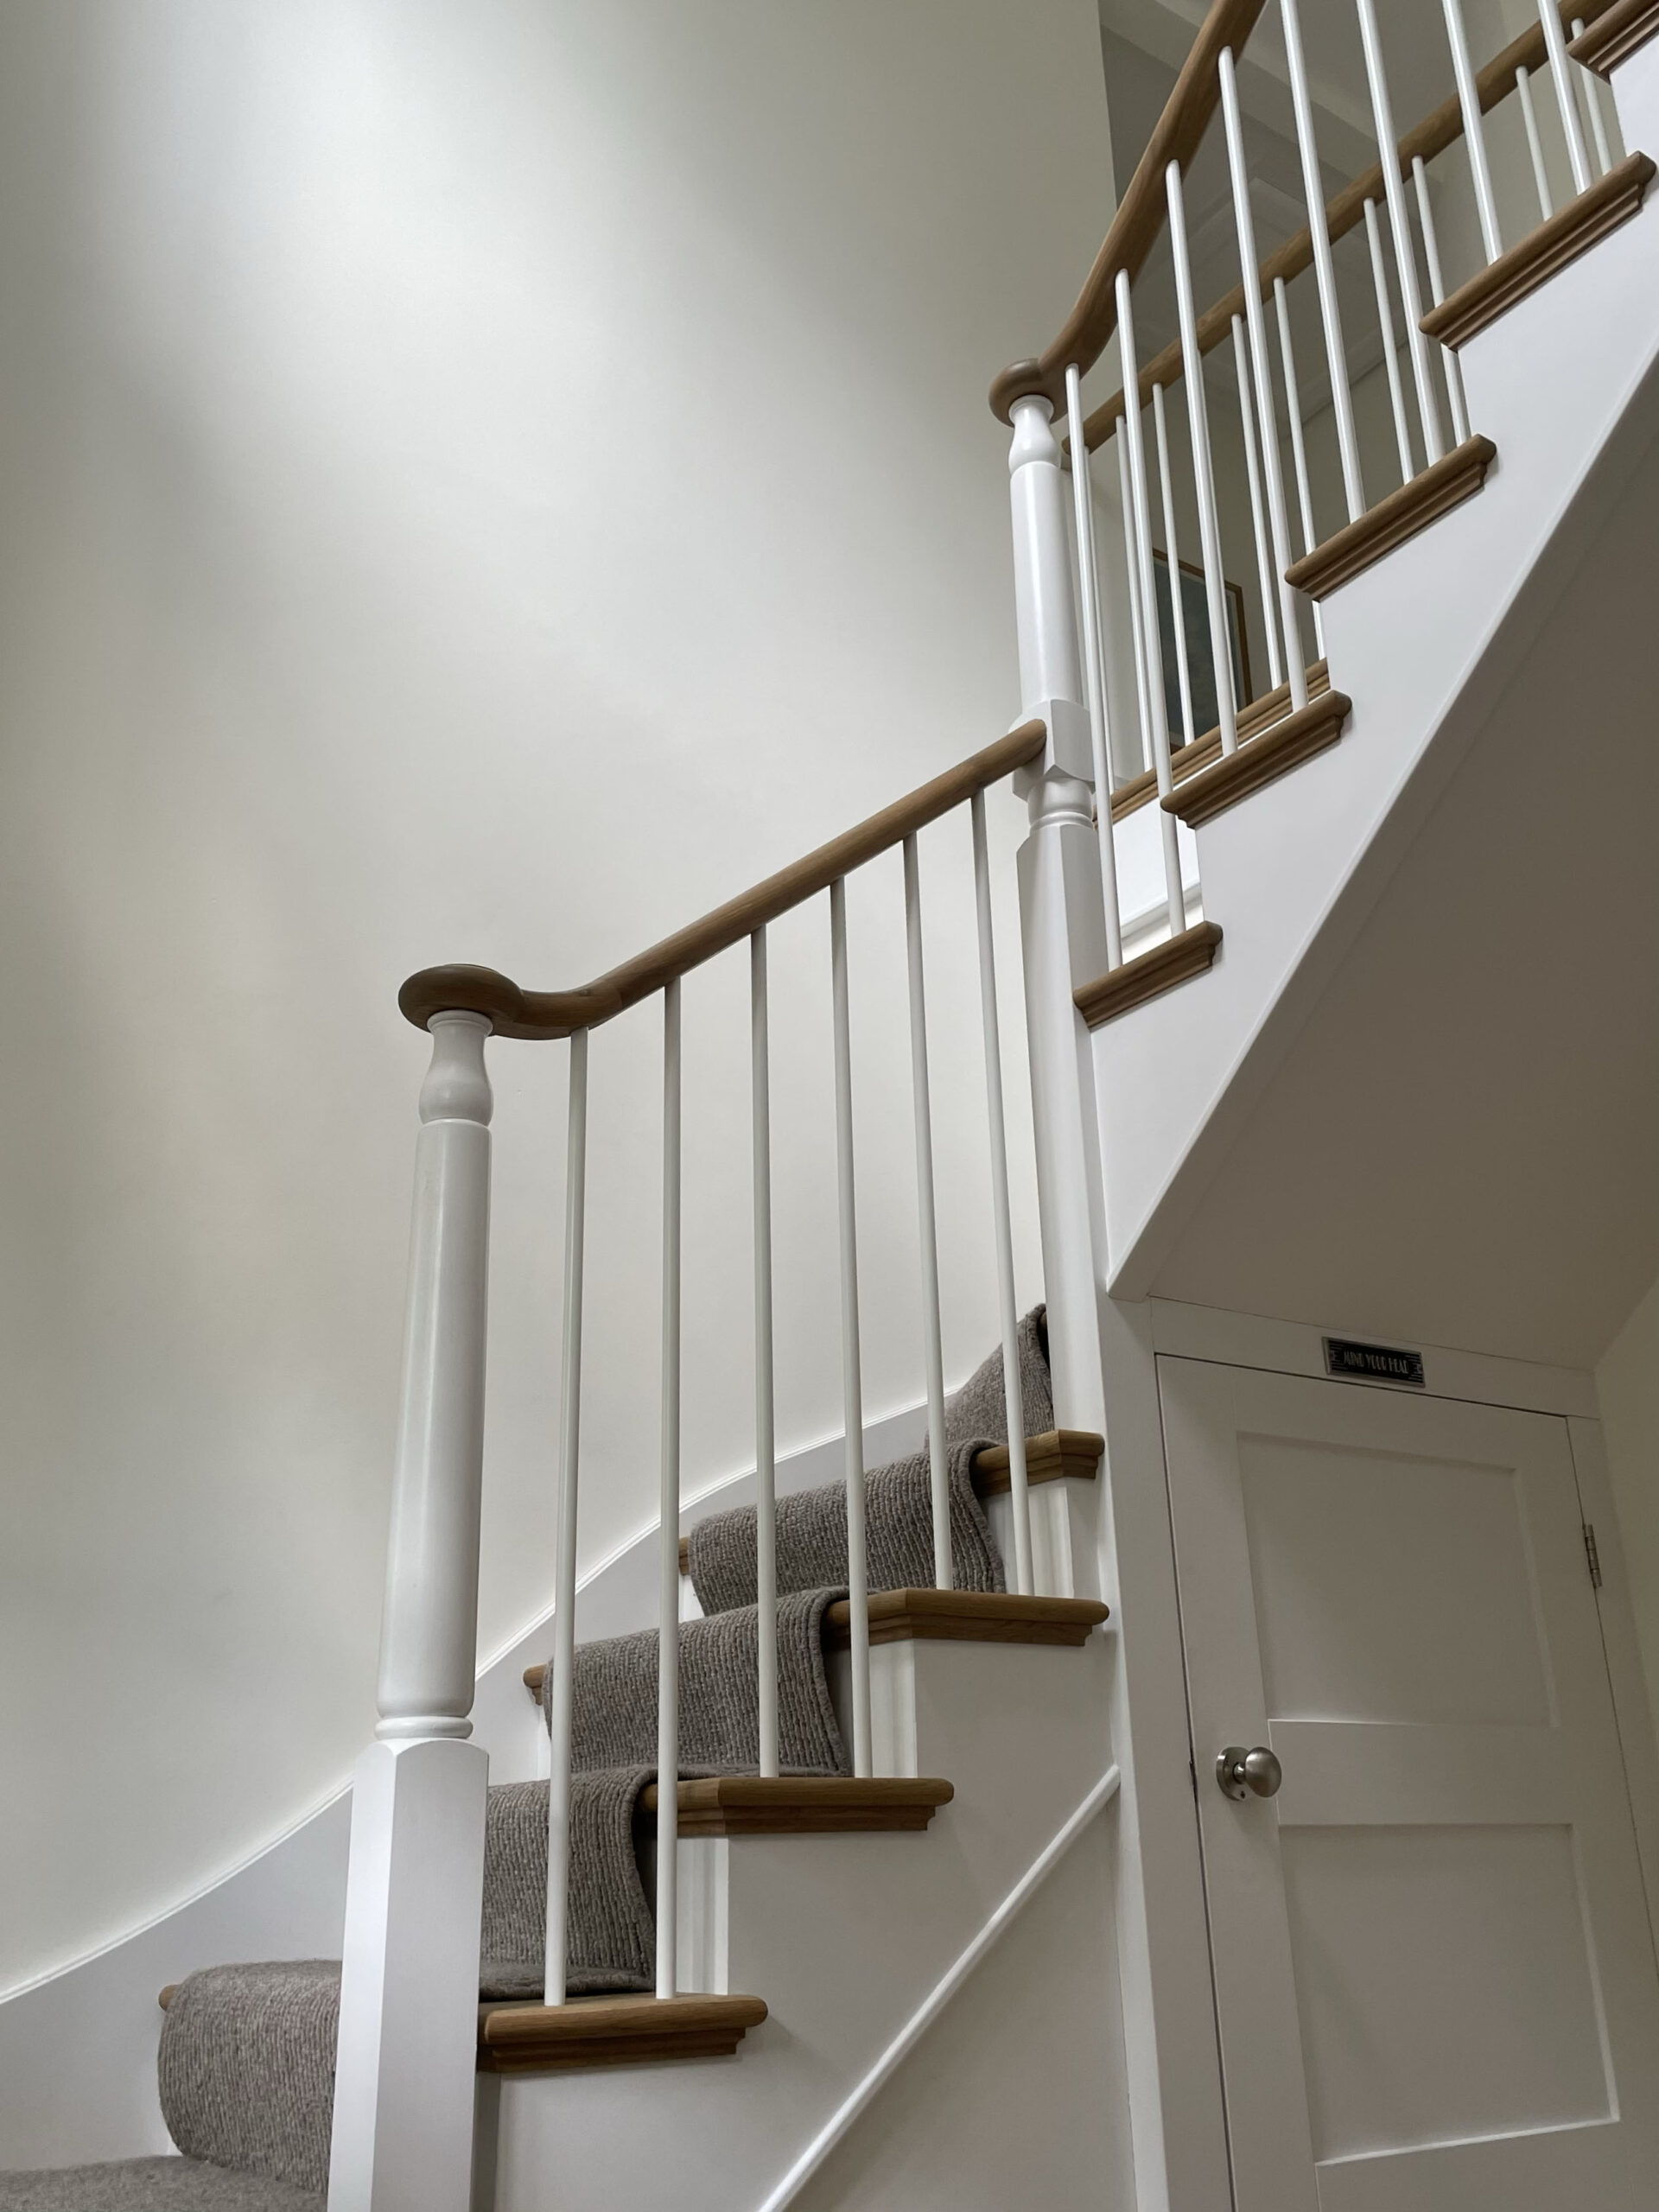 James Steel Staircases - See our work - Get in touch